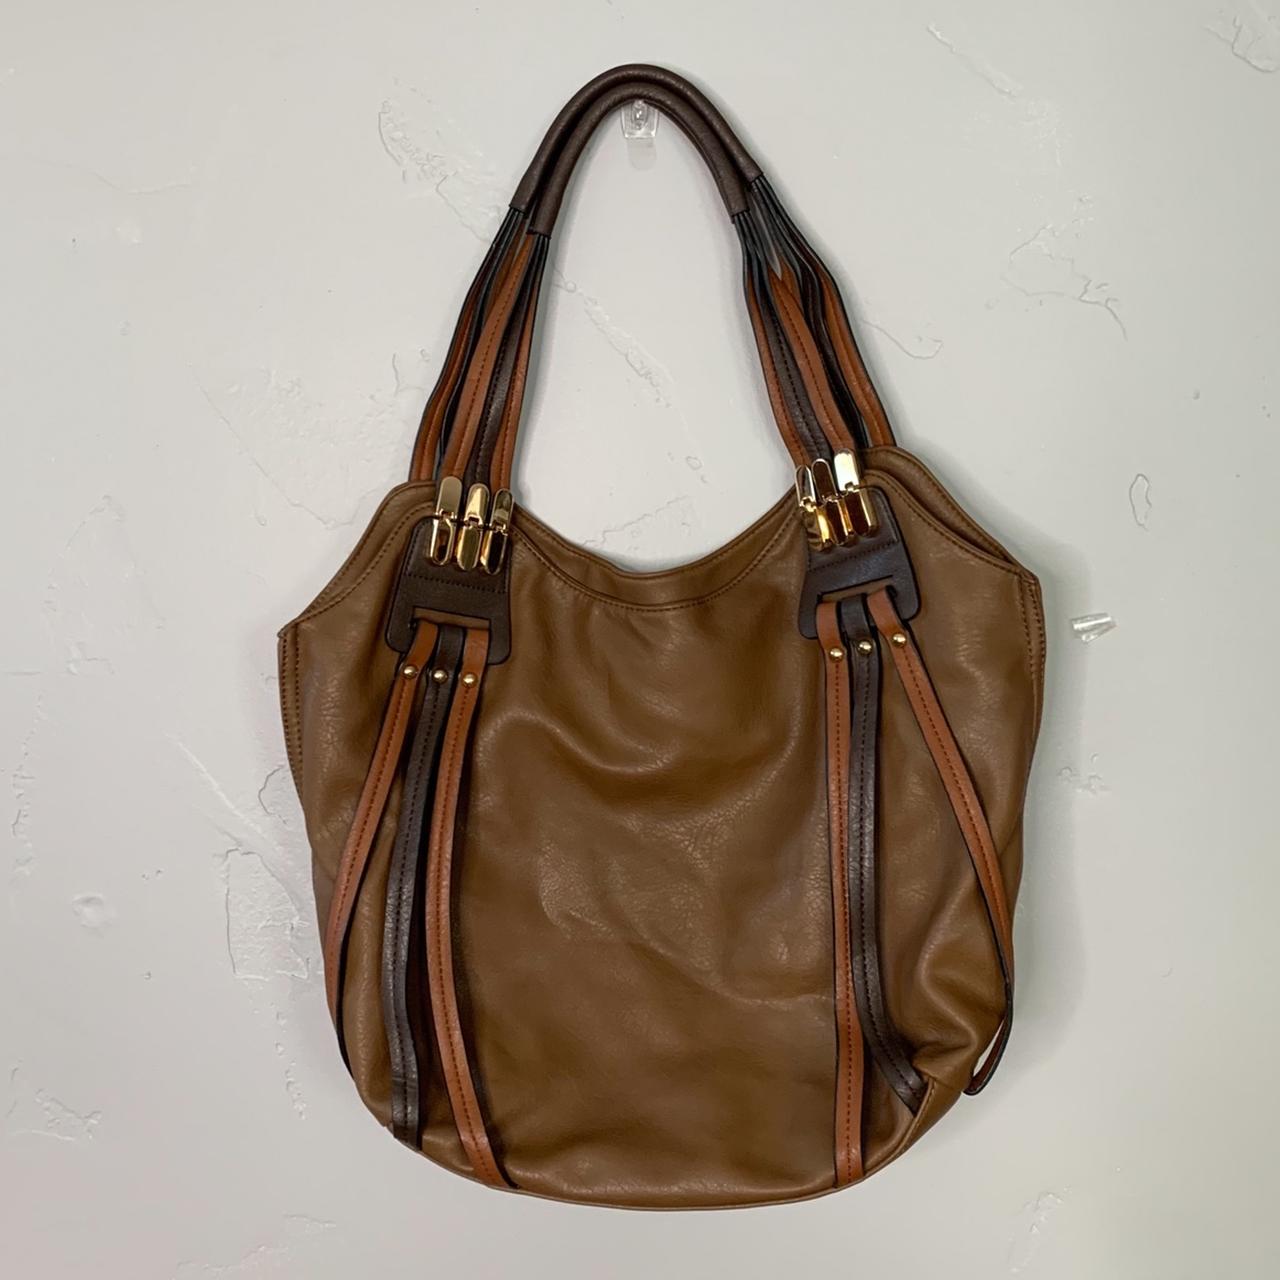 Leather Bags in Jaipur,Leather Bags Suppliers Manufacturers Wholesaler